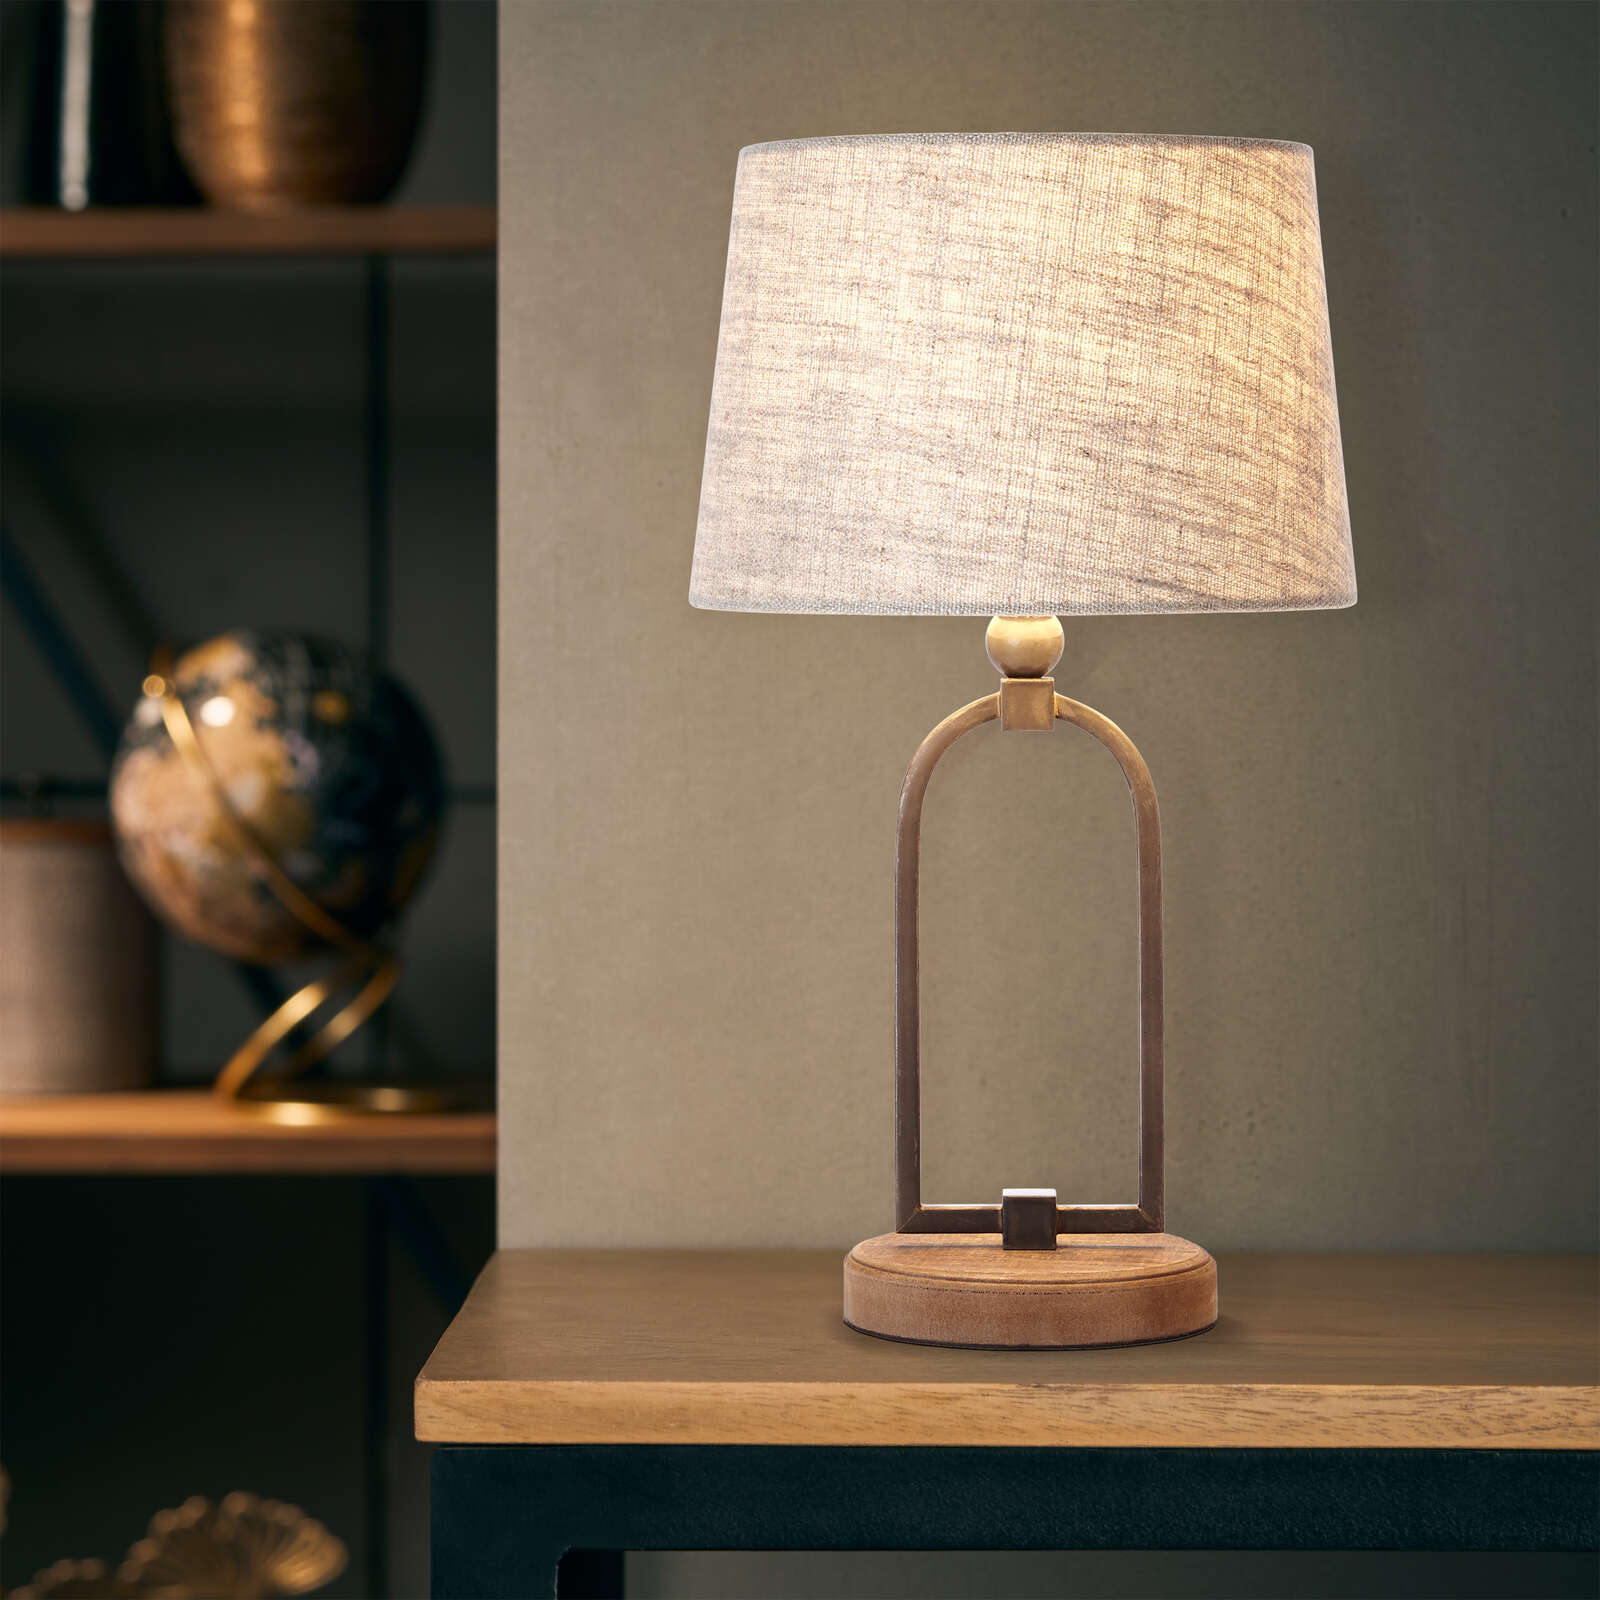             Textile table lamp - Ole 1 - Brown
        